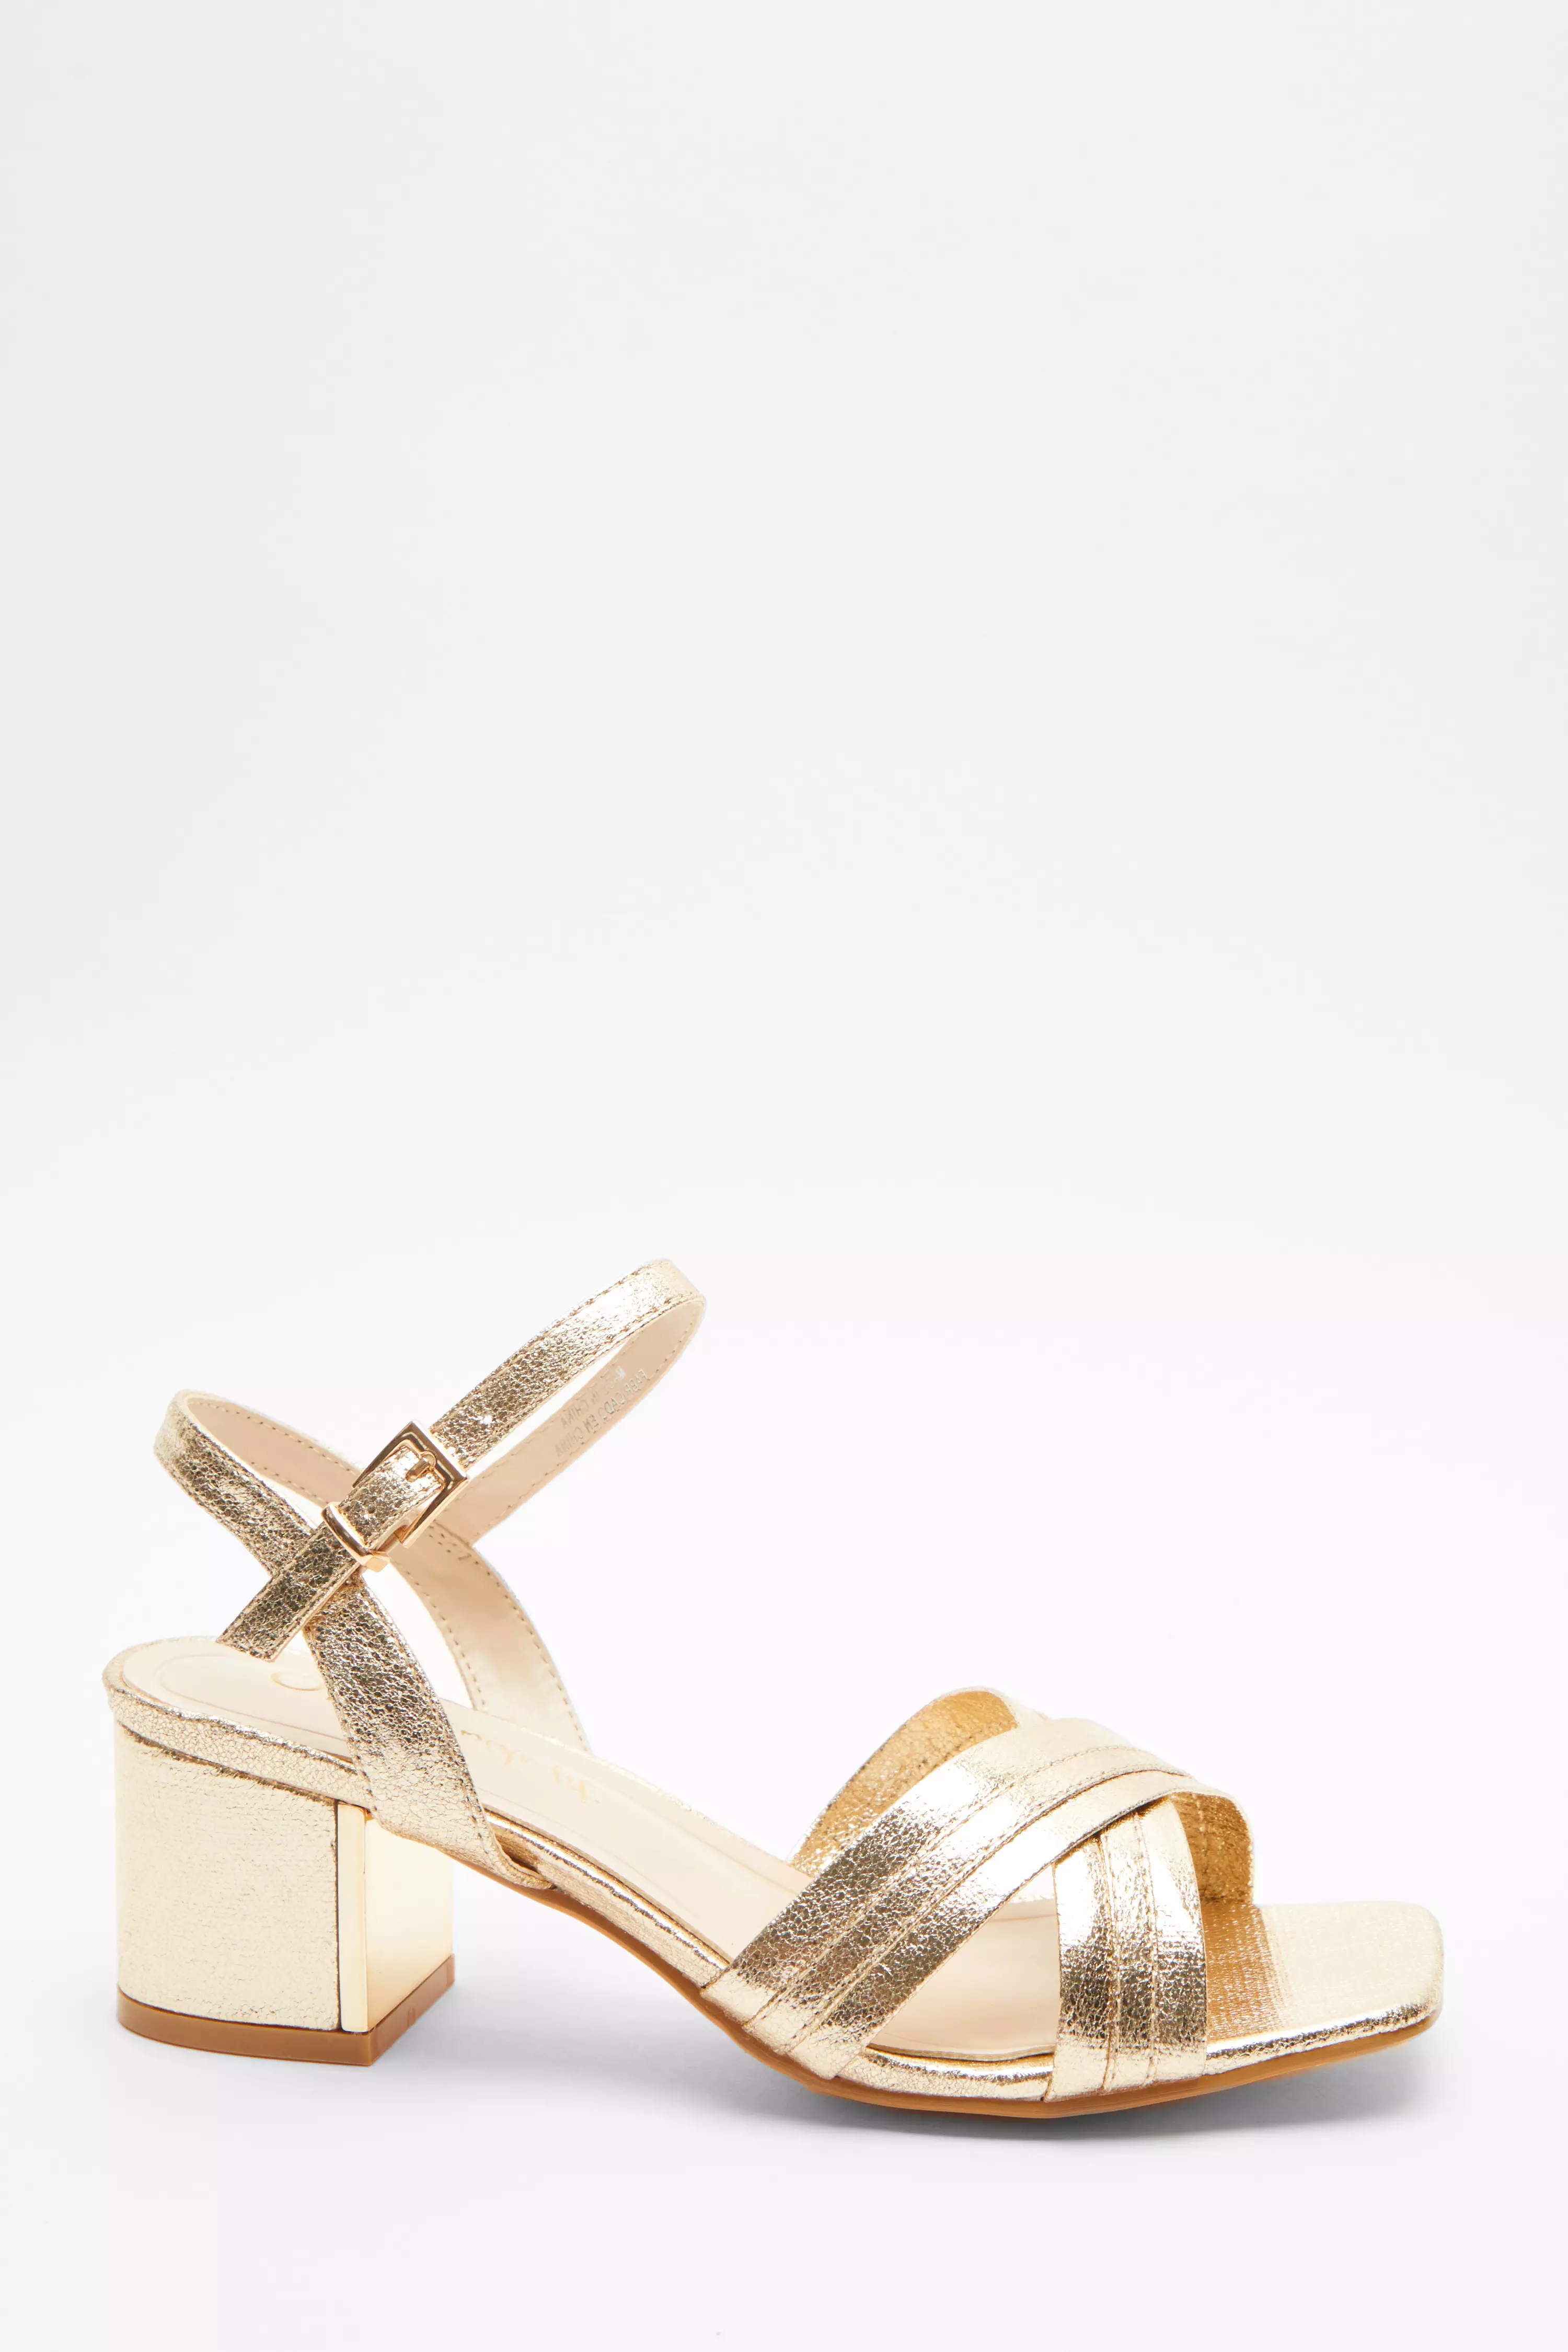 Wide Fit Gold Block Heeled Sandals - QUIZ Clothing